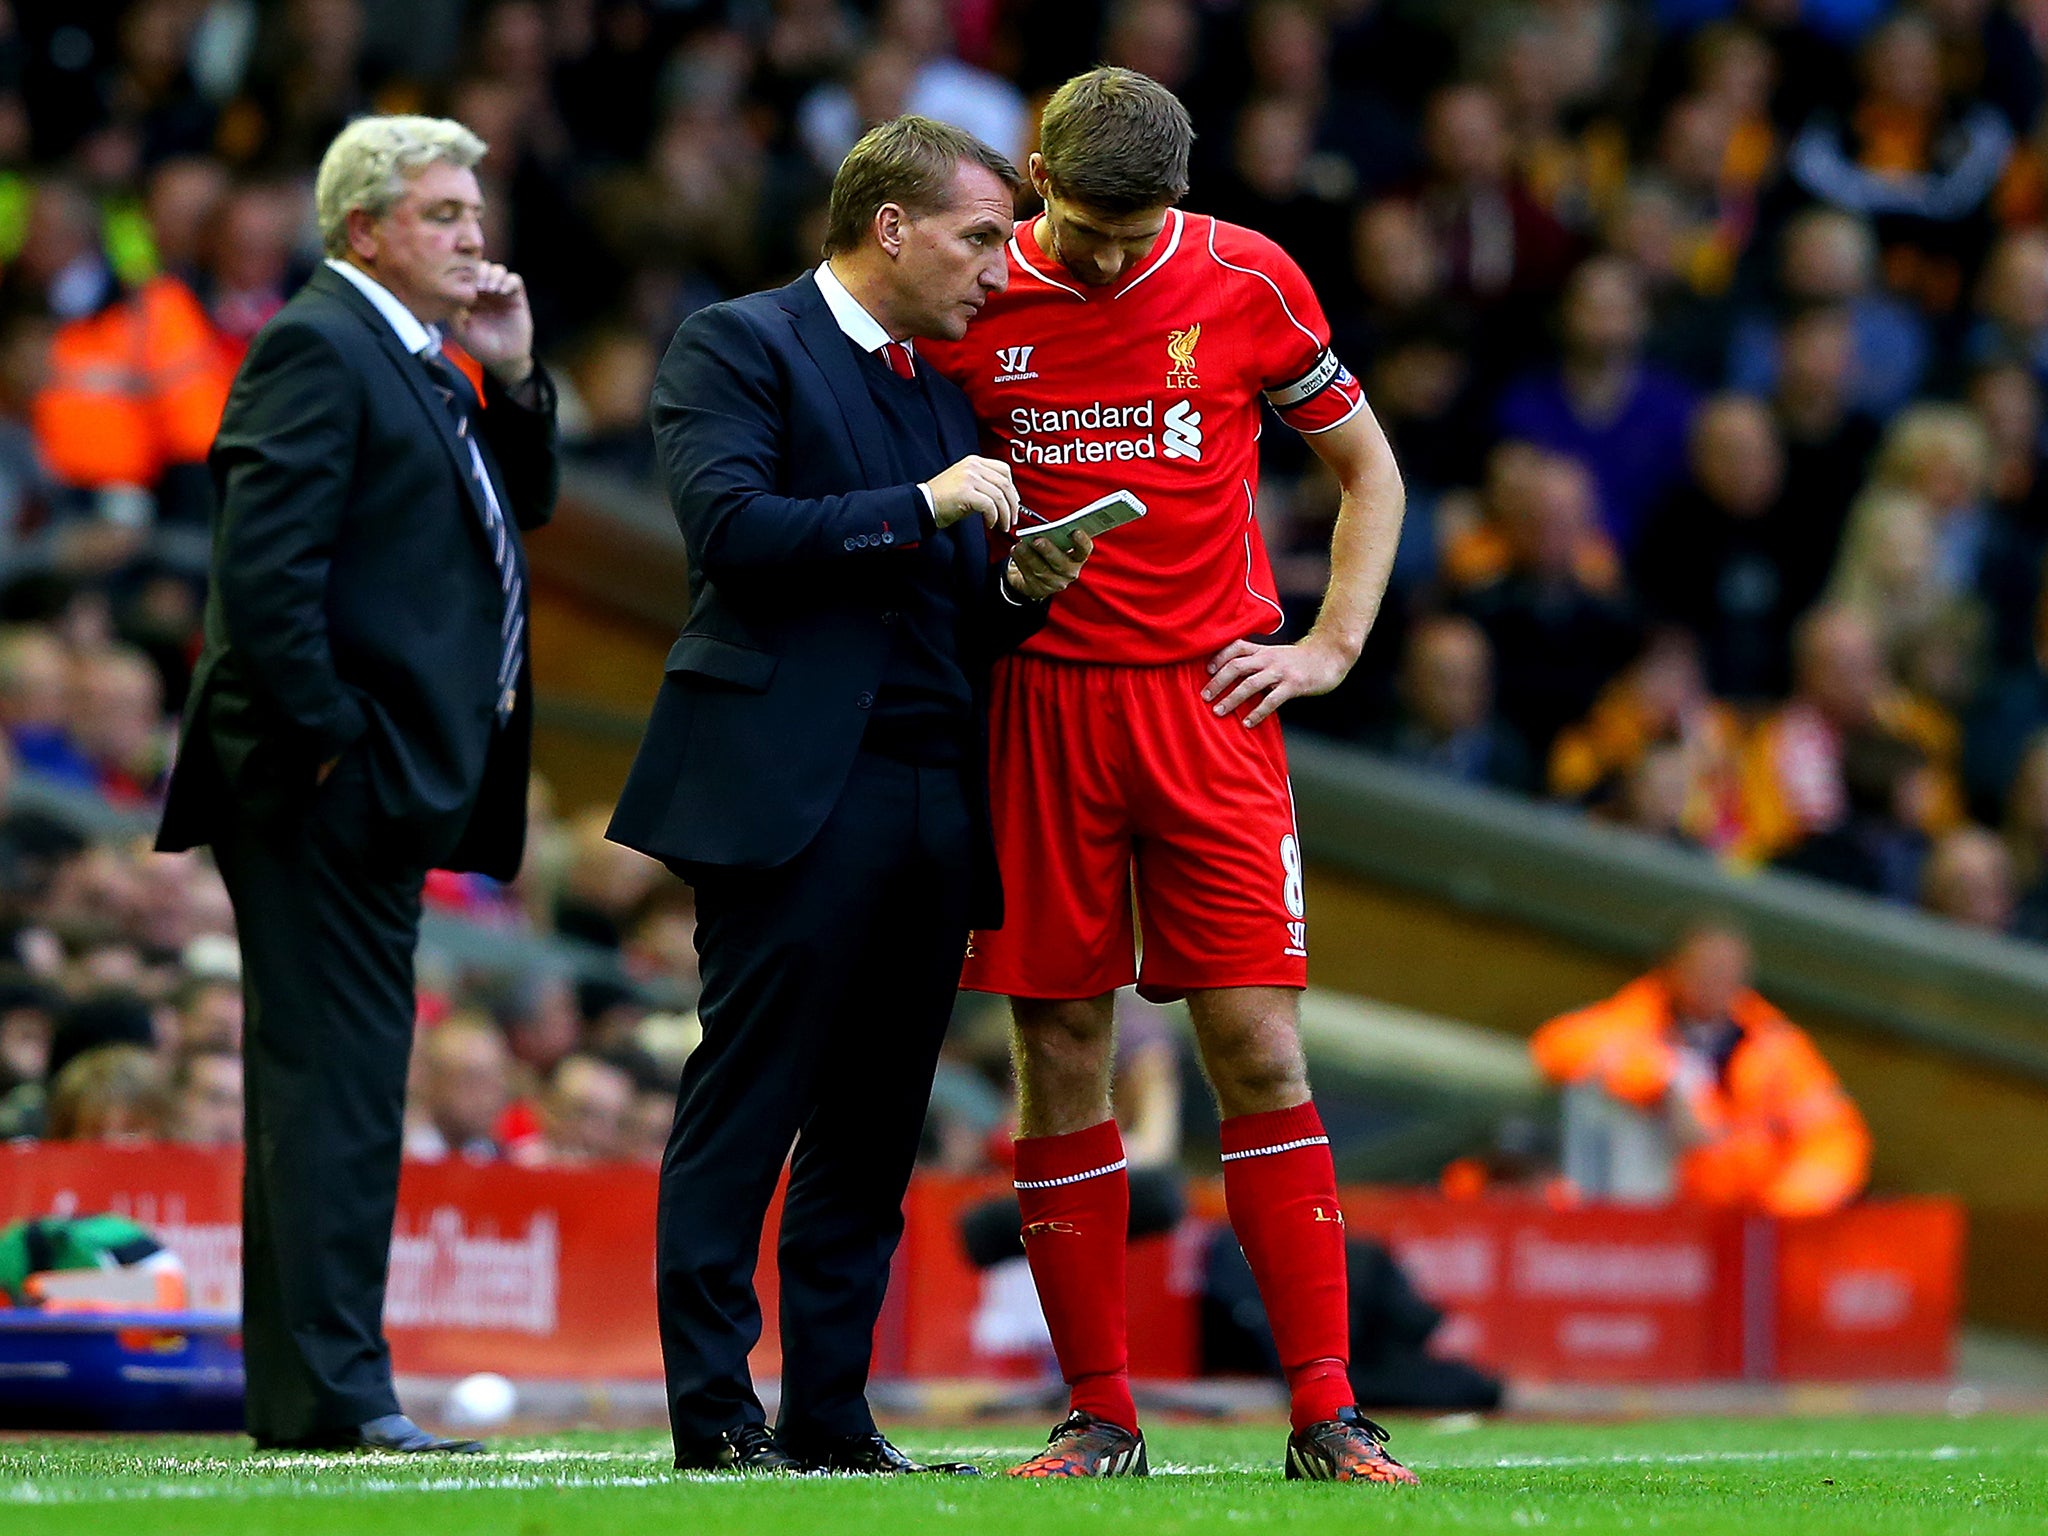 Brendan Rodgers, manager of Liverpool speaks with his captain Steven Gerrard as Steve Bruce manager of Hull City looks on